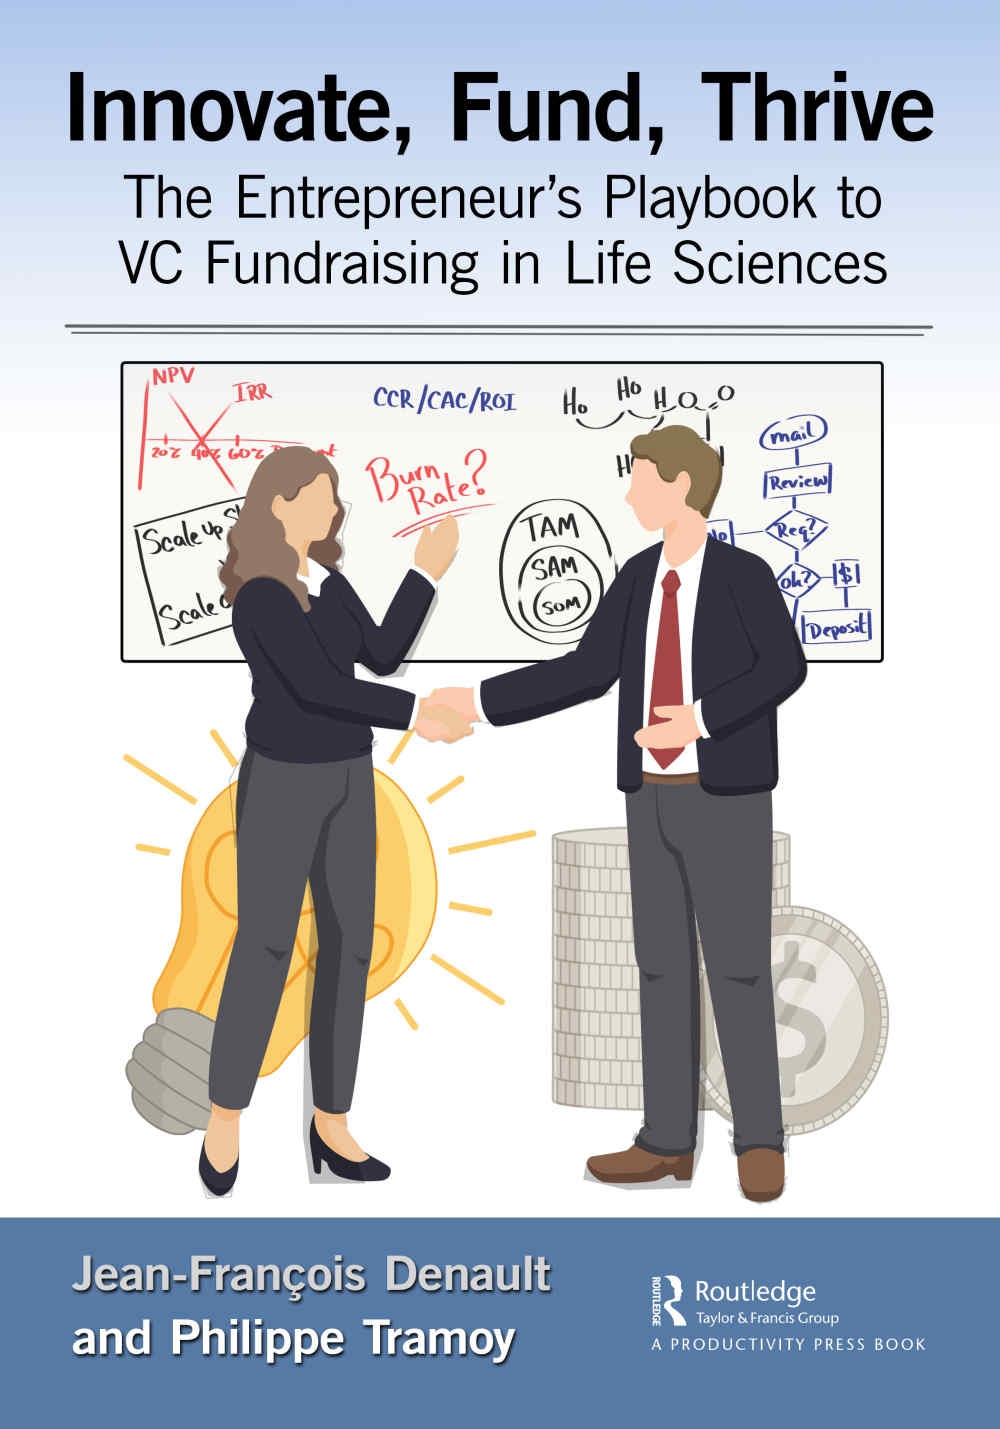 Fundraising for Life Science Entrepreneurs: A Practical Guide for Start-Ups and Established Organizations